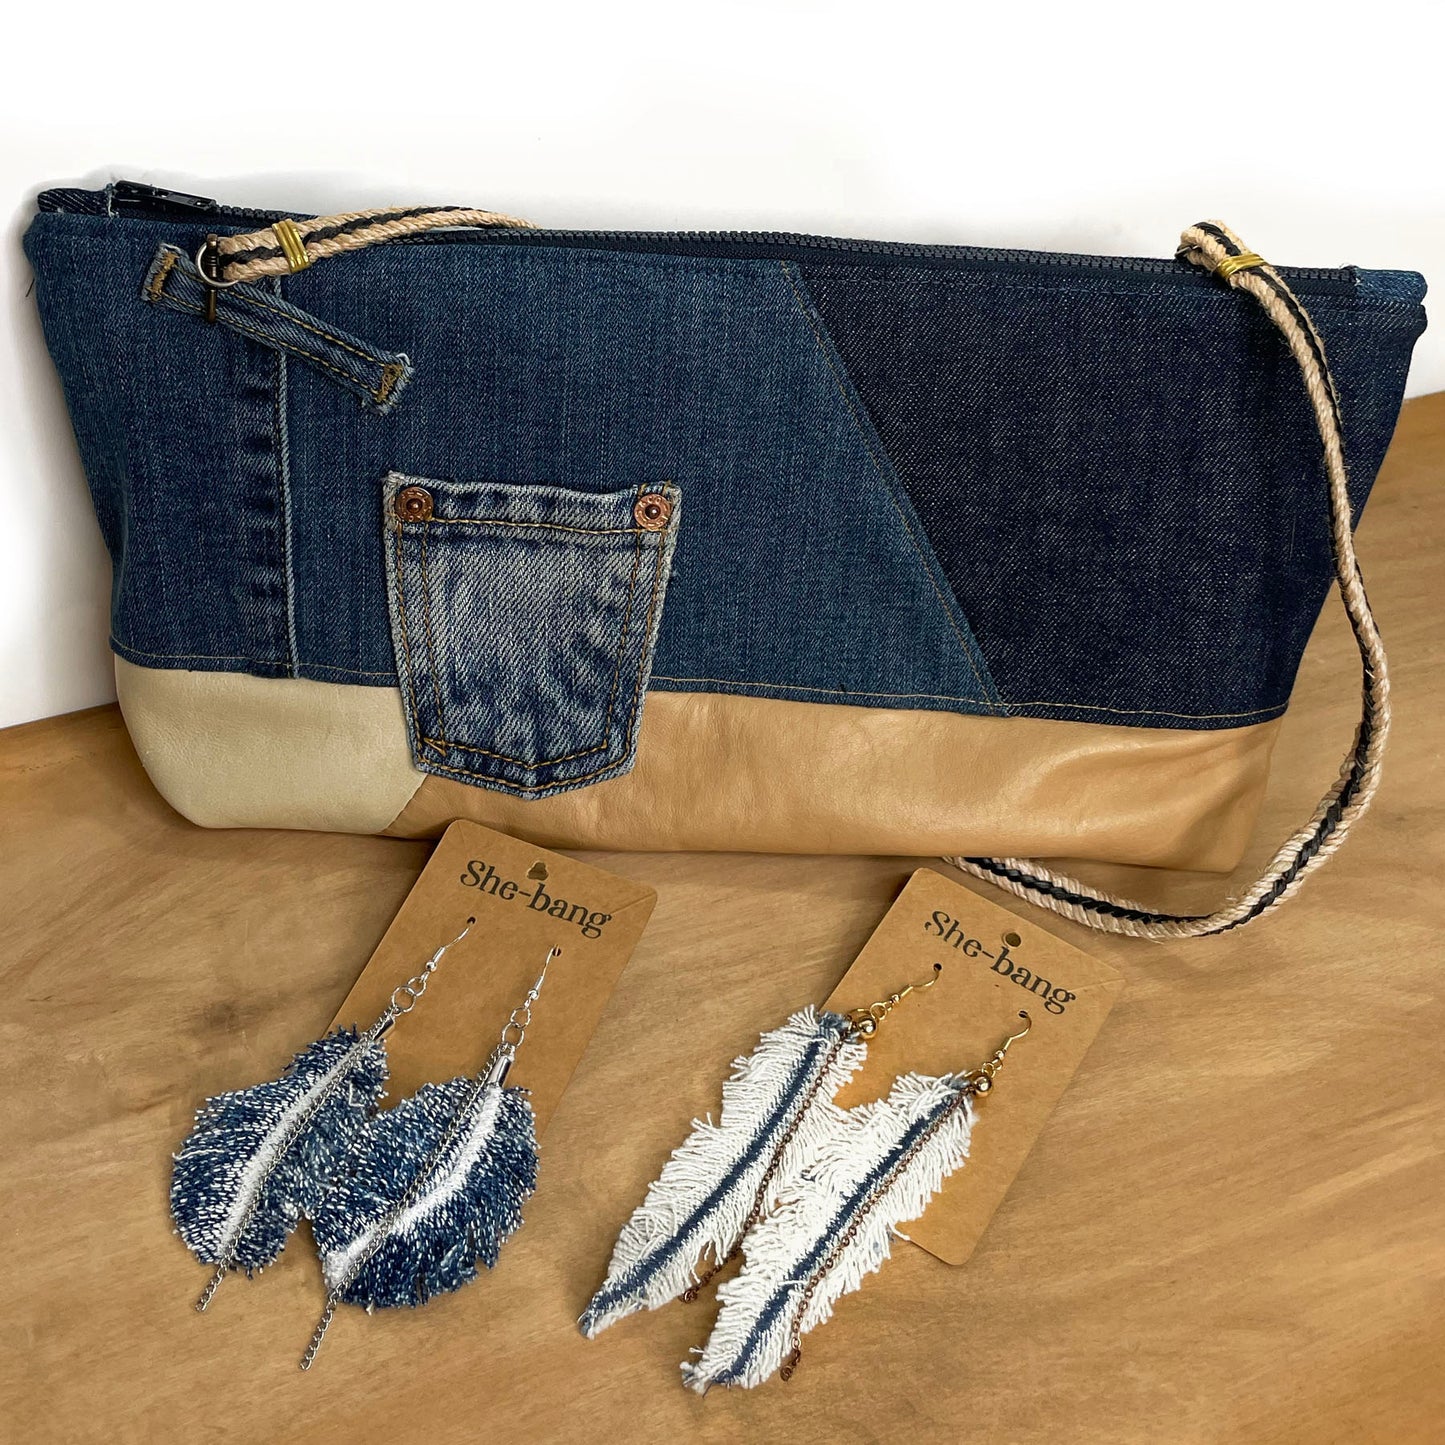 handmade unique handbags, recycled denim bags, handmade genuine leather bags, completely one of a kind bags made by local brooklyn designers.